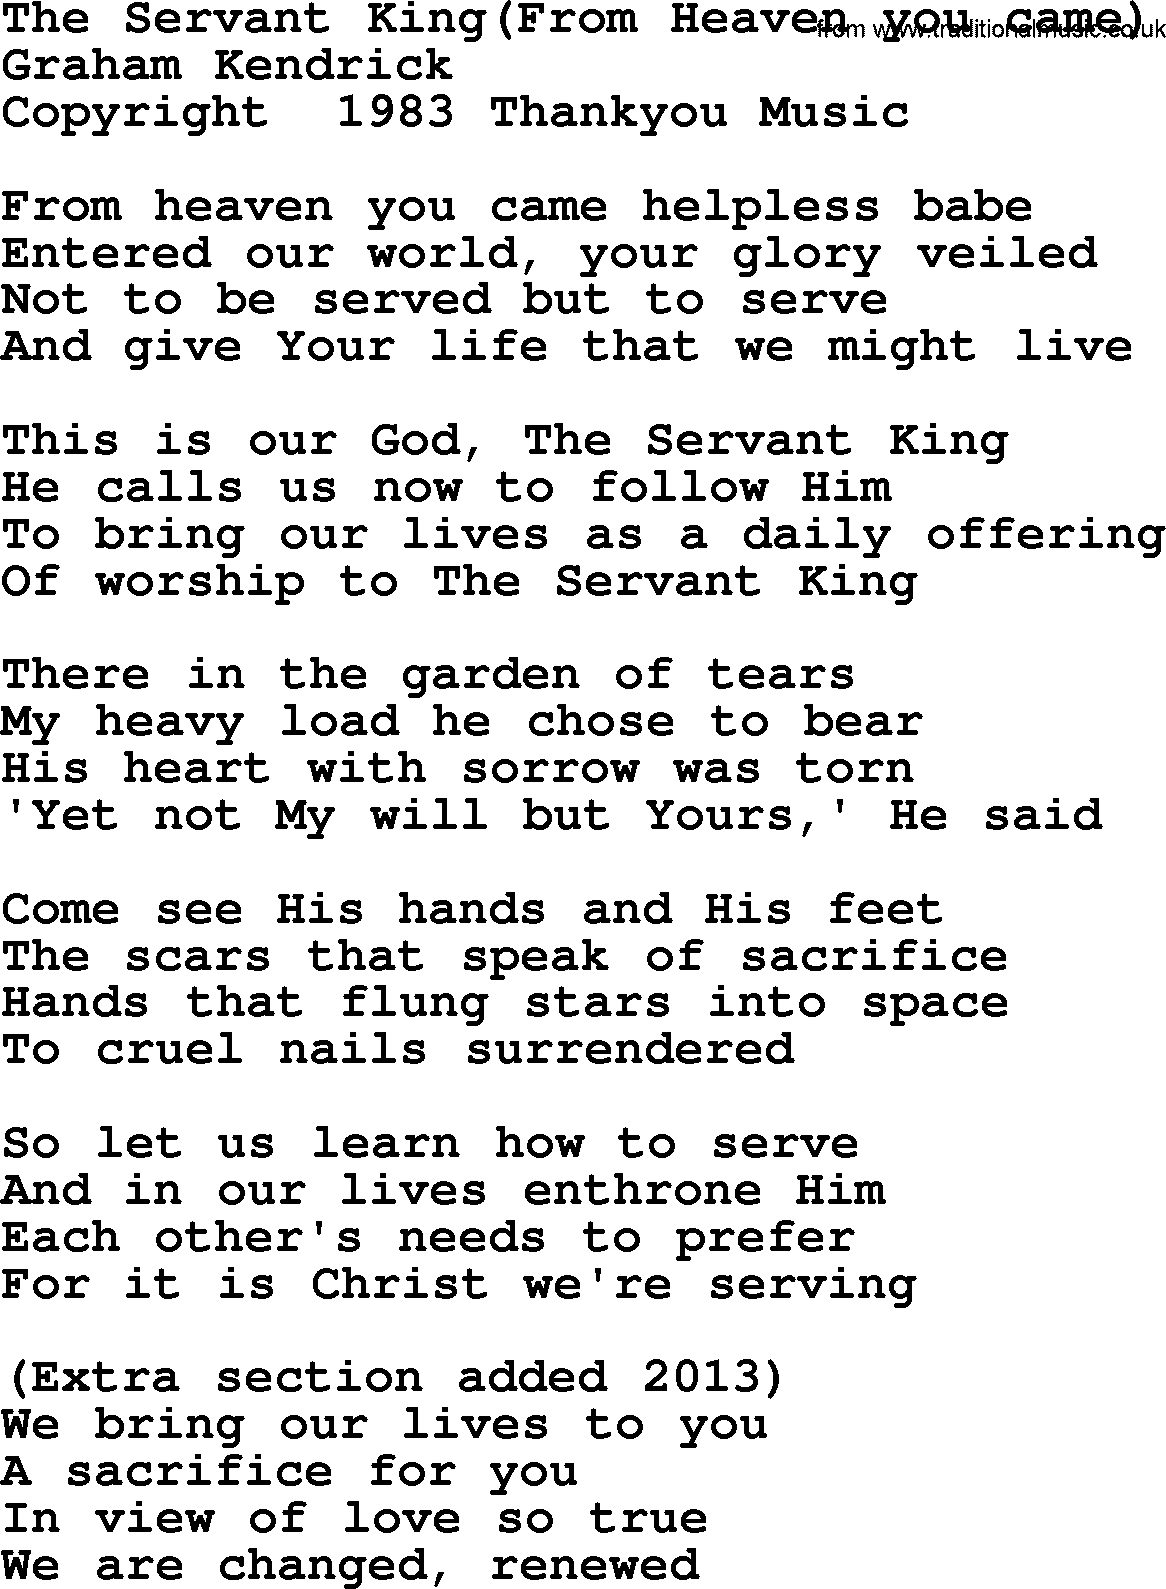 A collection of 500+ most sung Christian church hymns and songs, title: The Servant King(From Heaven You Came), lyrics, PPTX and PDF